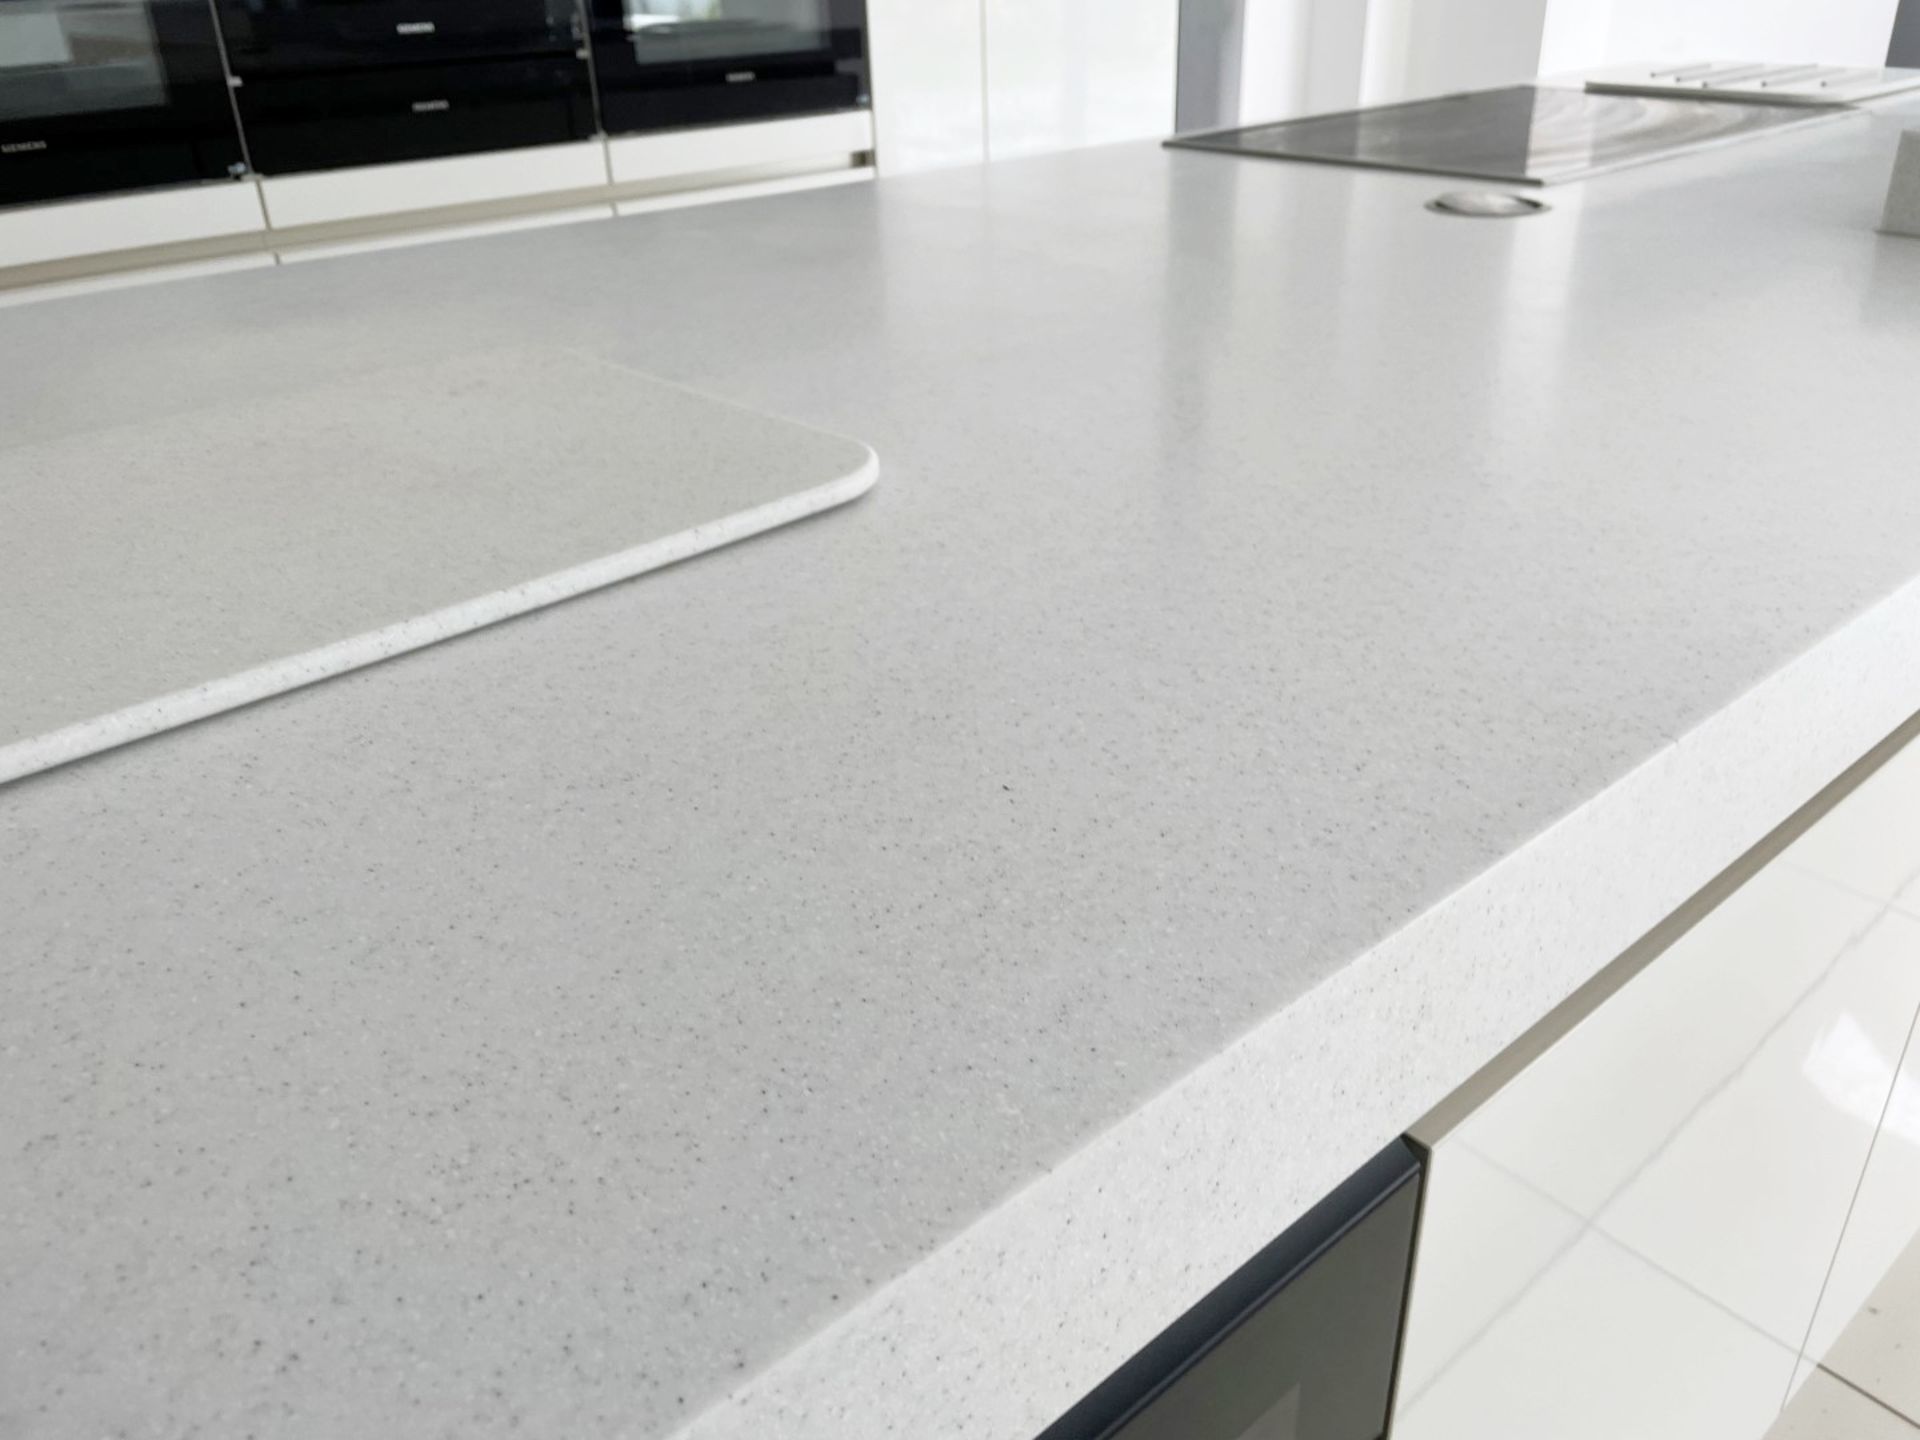 1 x SieMatic Contemporary Fitted Kitchen With Branded Appliances, Central Island + Corian Worktops - Image 92 of 100